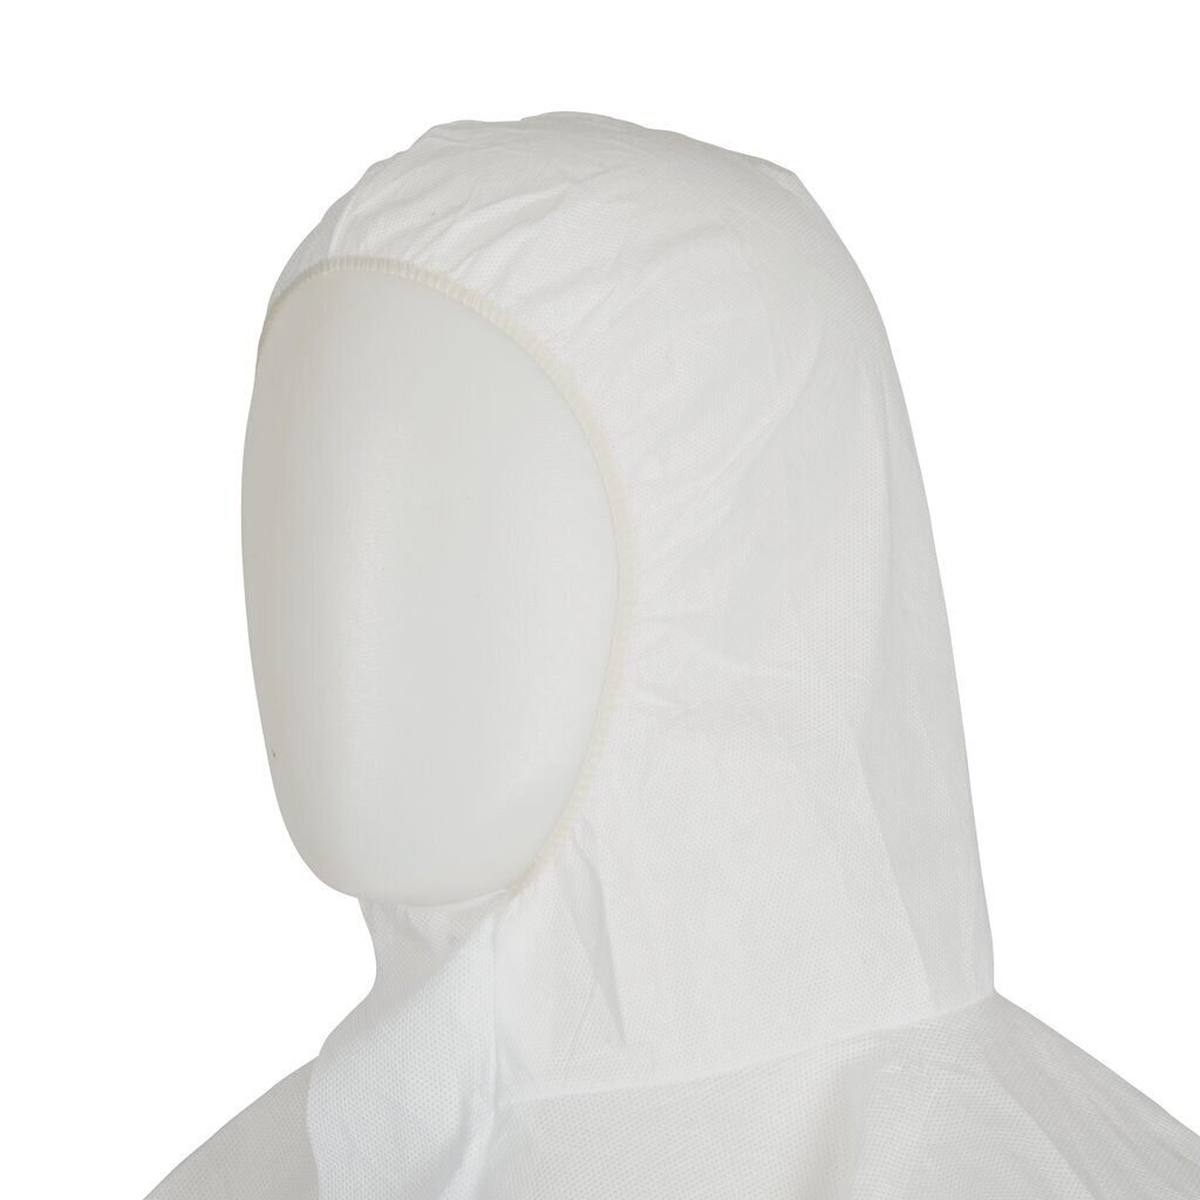 3M 4515W Protective coverall, white, TYPE 5/6, size XL, material SMMS low-lint, elastic band finish